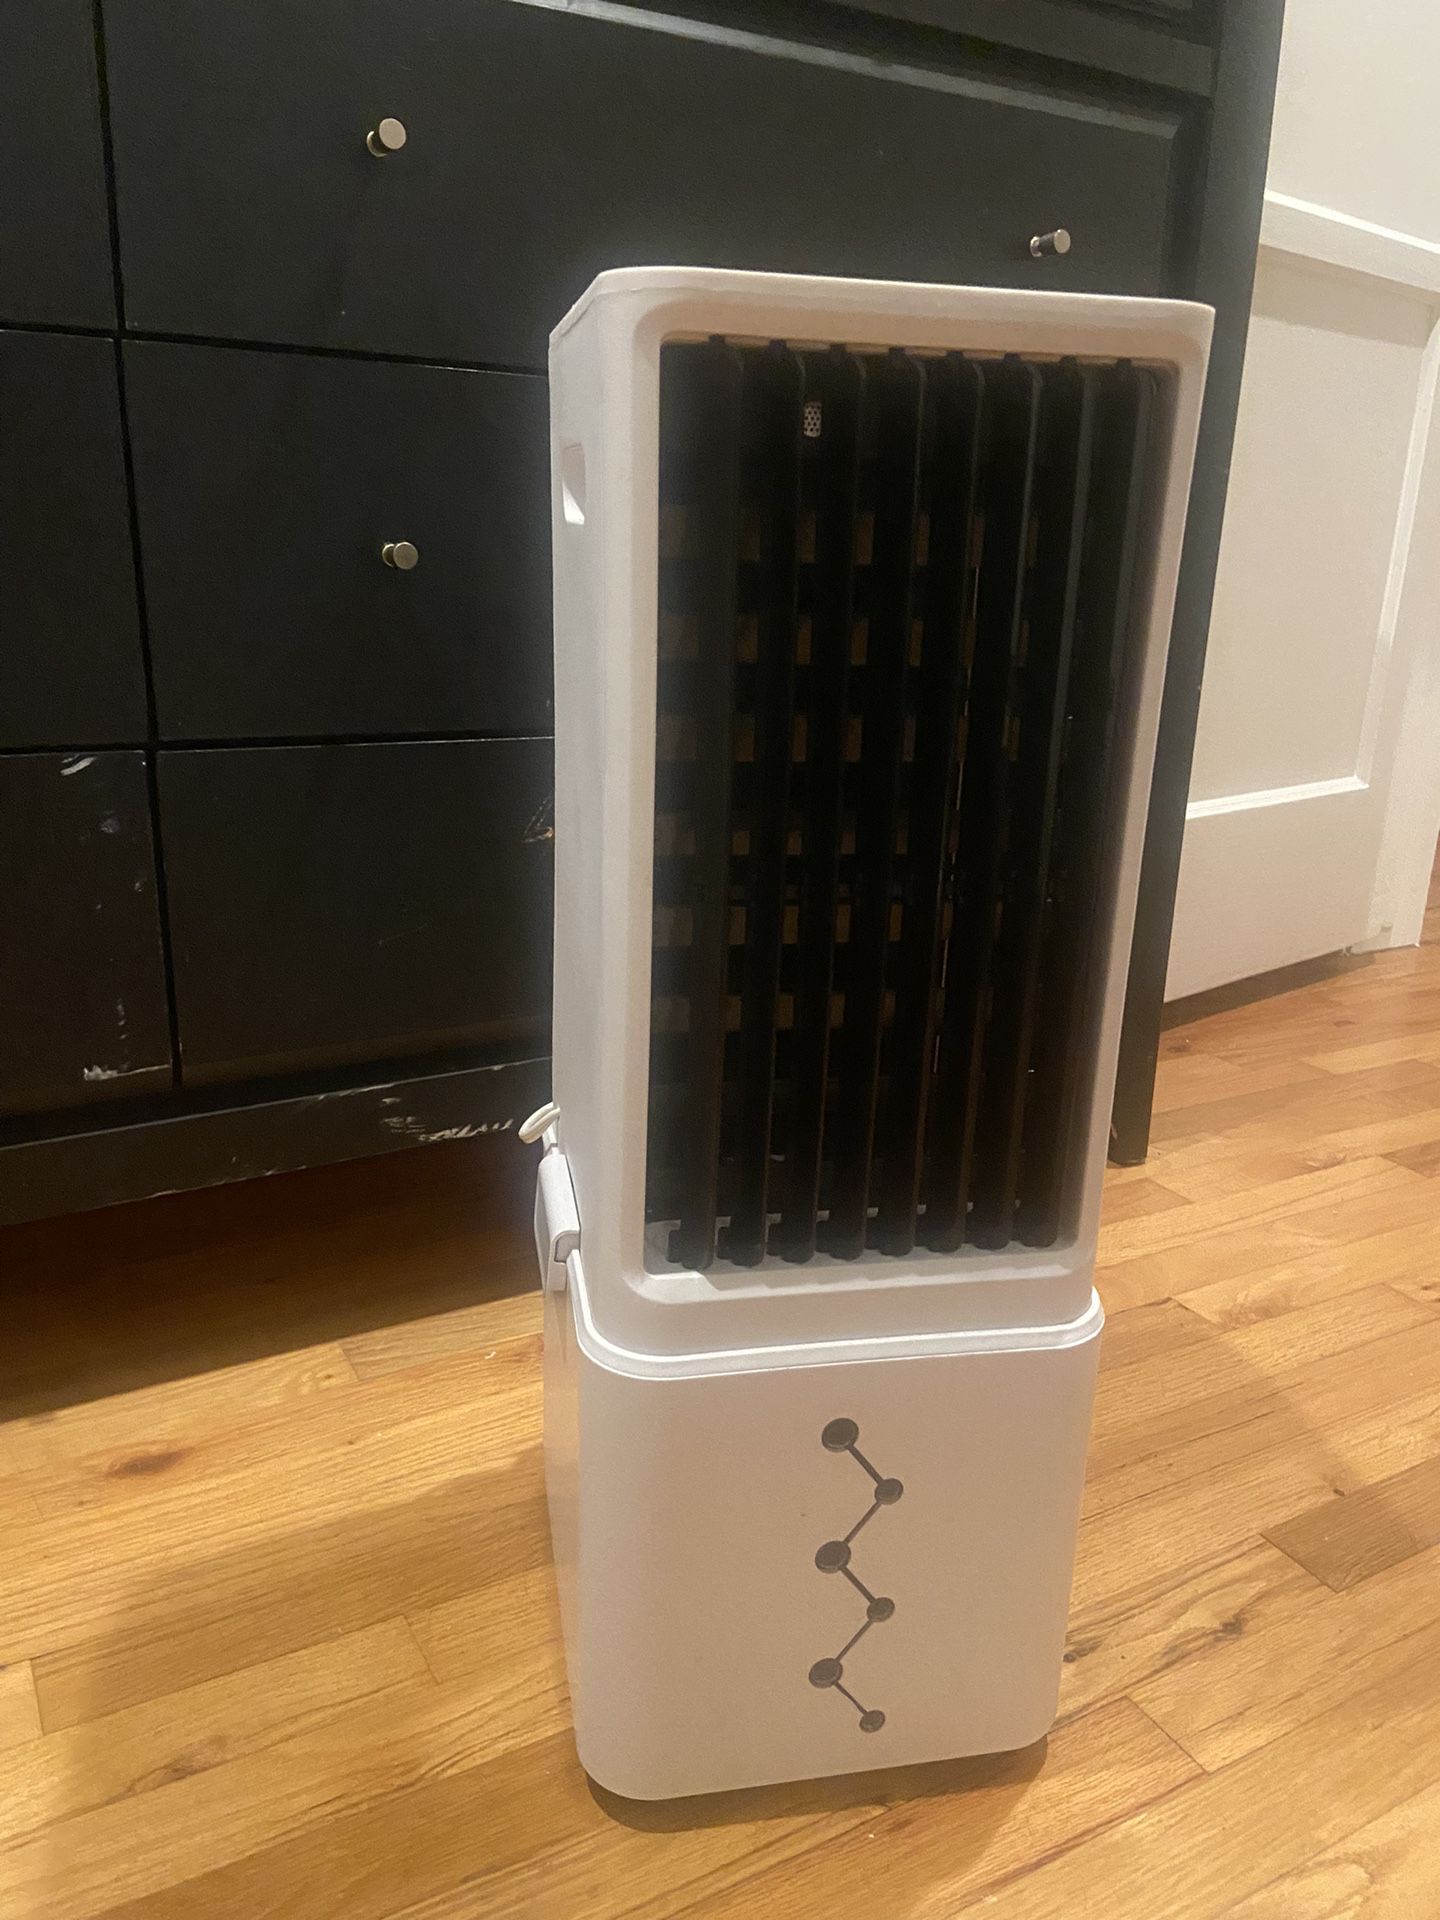 Portable AC Unit For Room